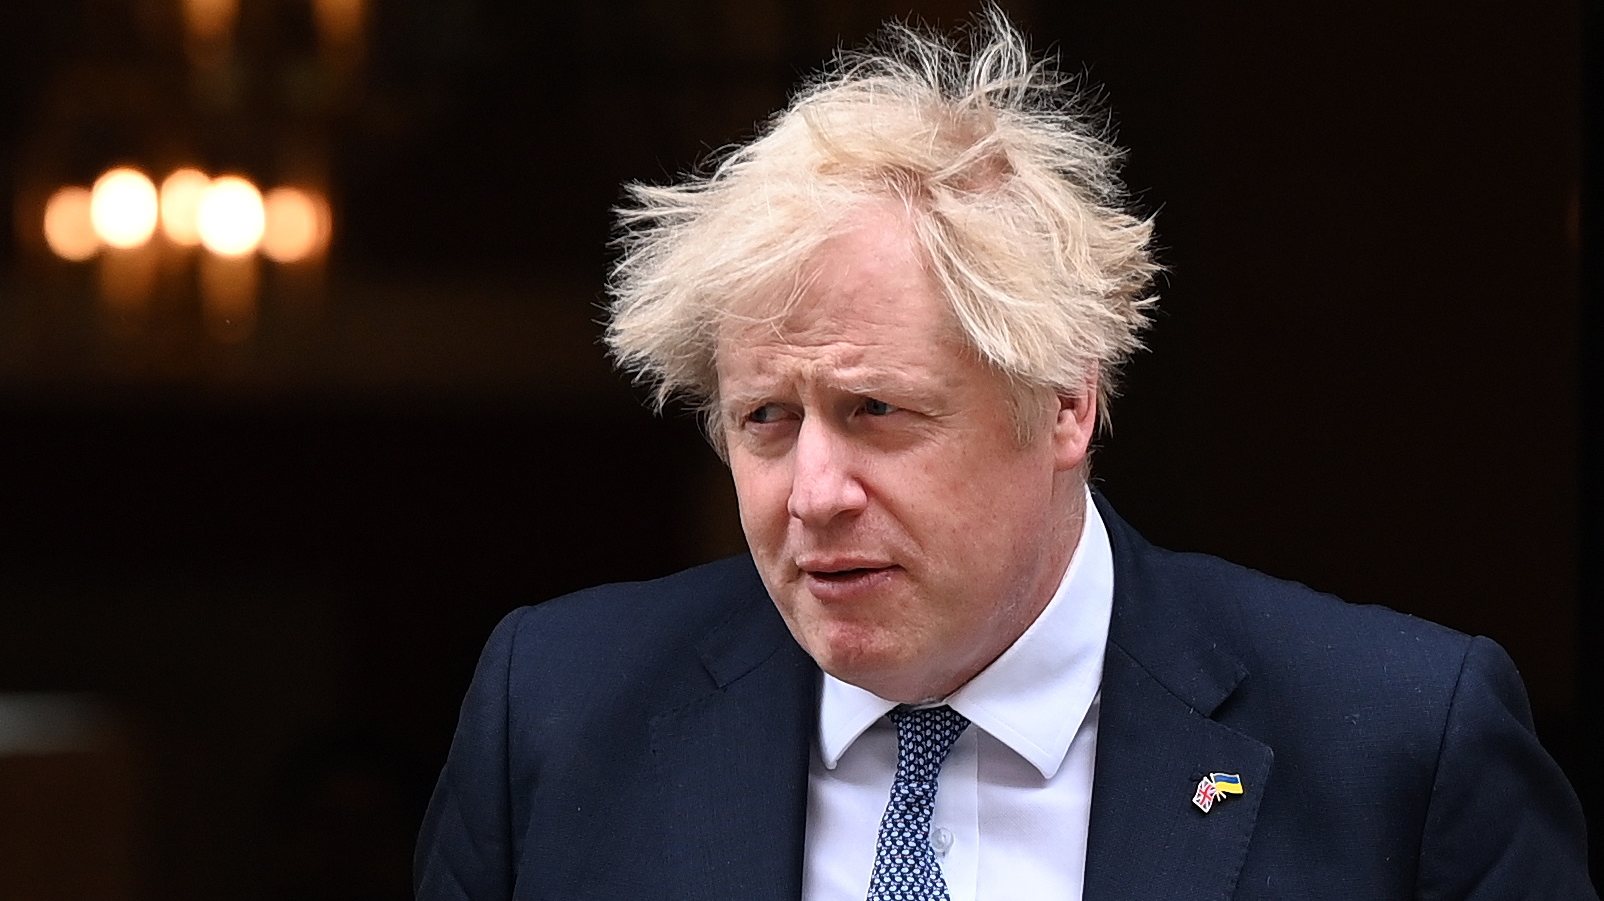 epa09976863 British Prime Minister Boris Johnson departs 10 Downing Street in London, Britain, 26 May 2022. Johnson is under pressure over &#039;party gate&#039; allegations following new photographs showing him at a drinks party during lockdown.  EPA/ANDY RAIN